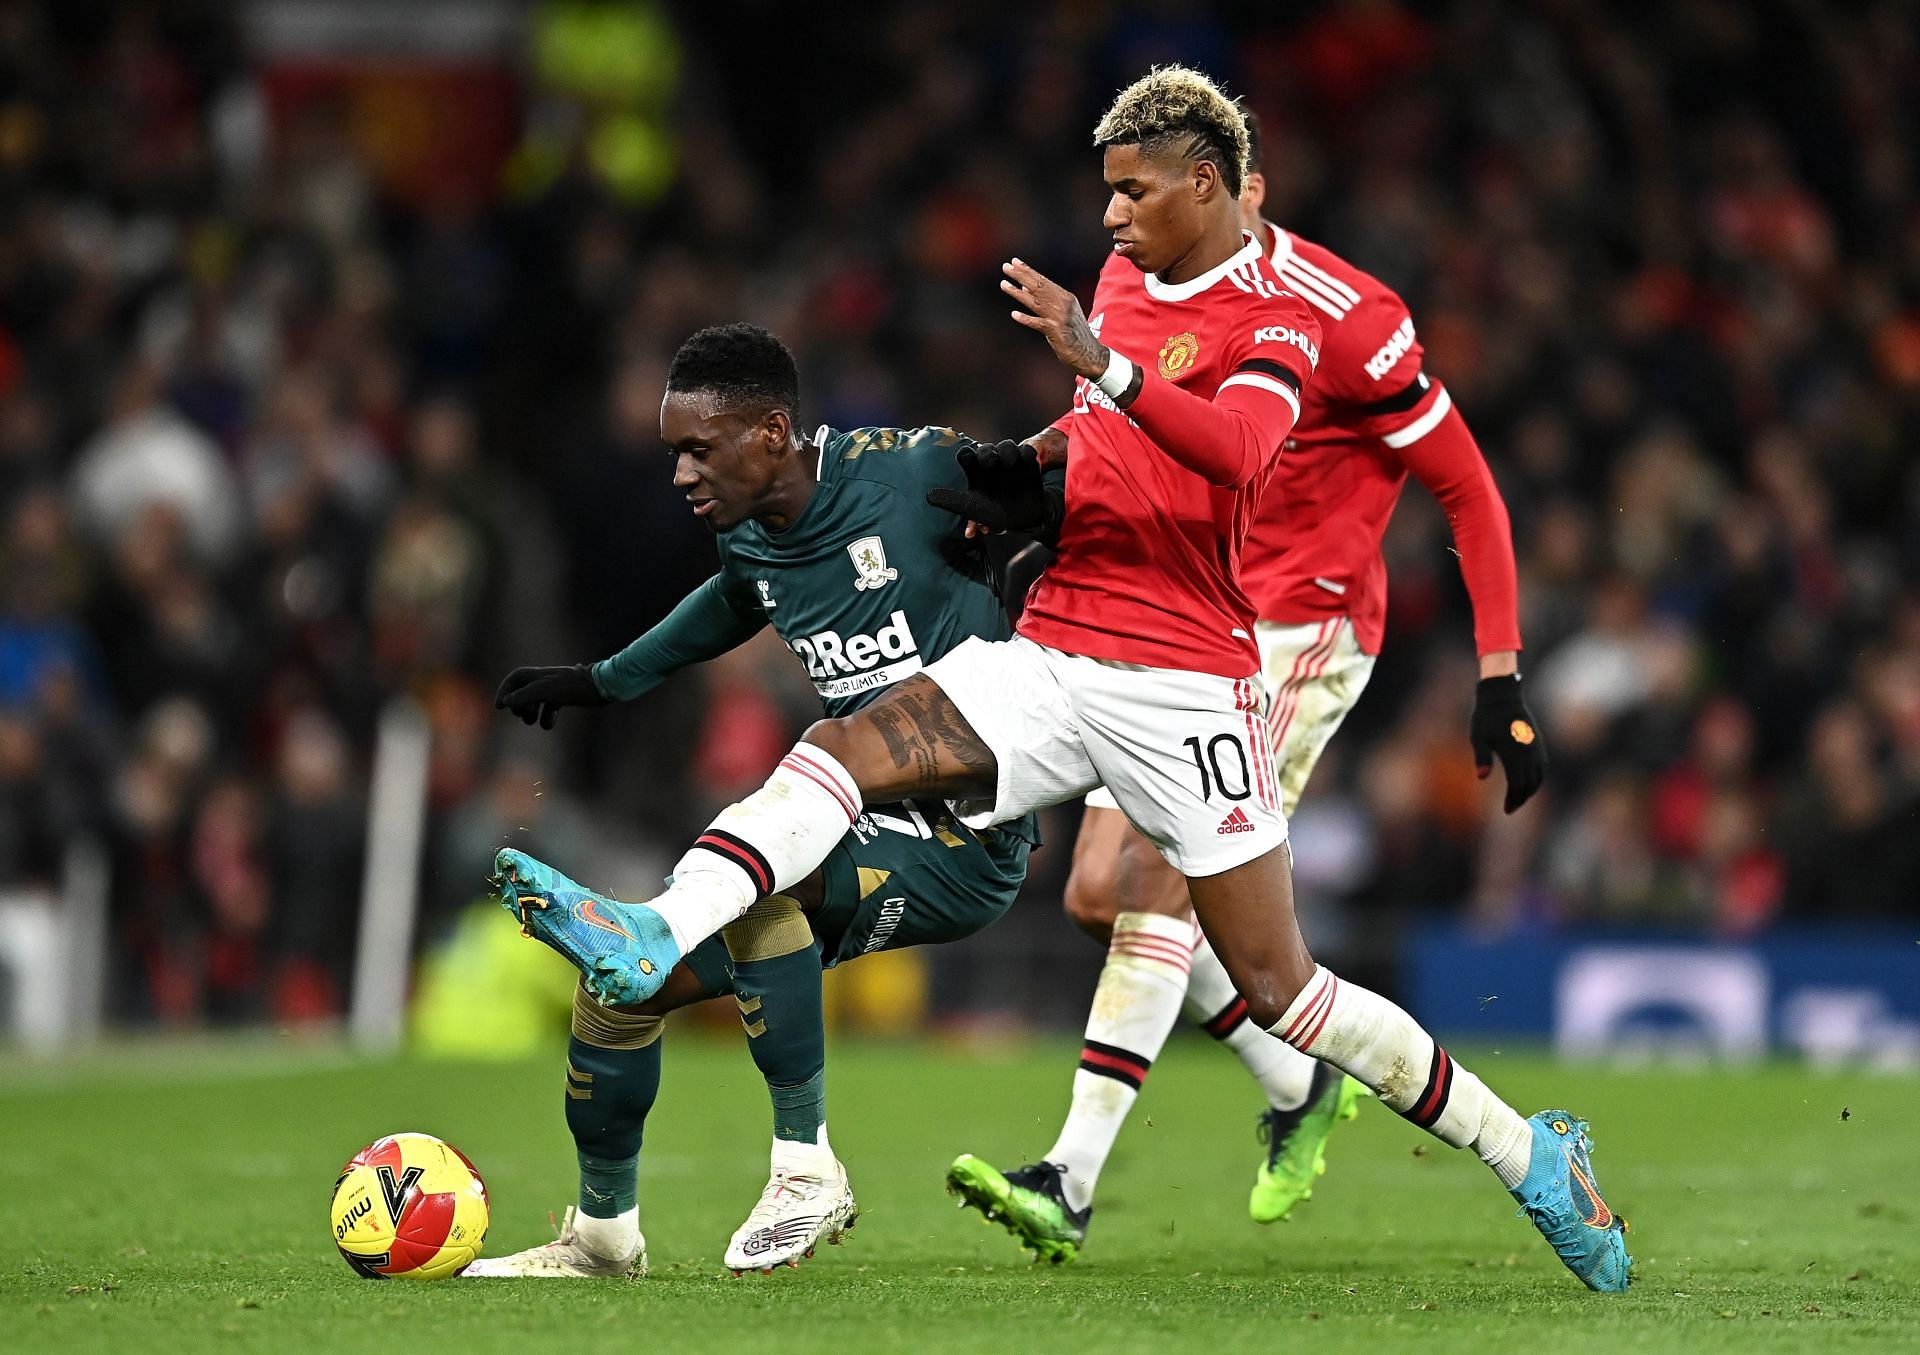 Manchester United v Middlesbrough: The Emirates FA Cup Fourth Round